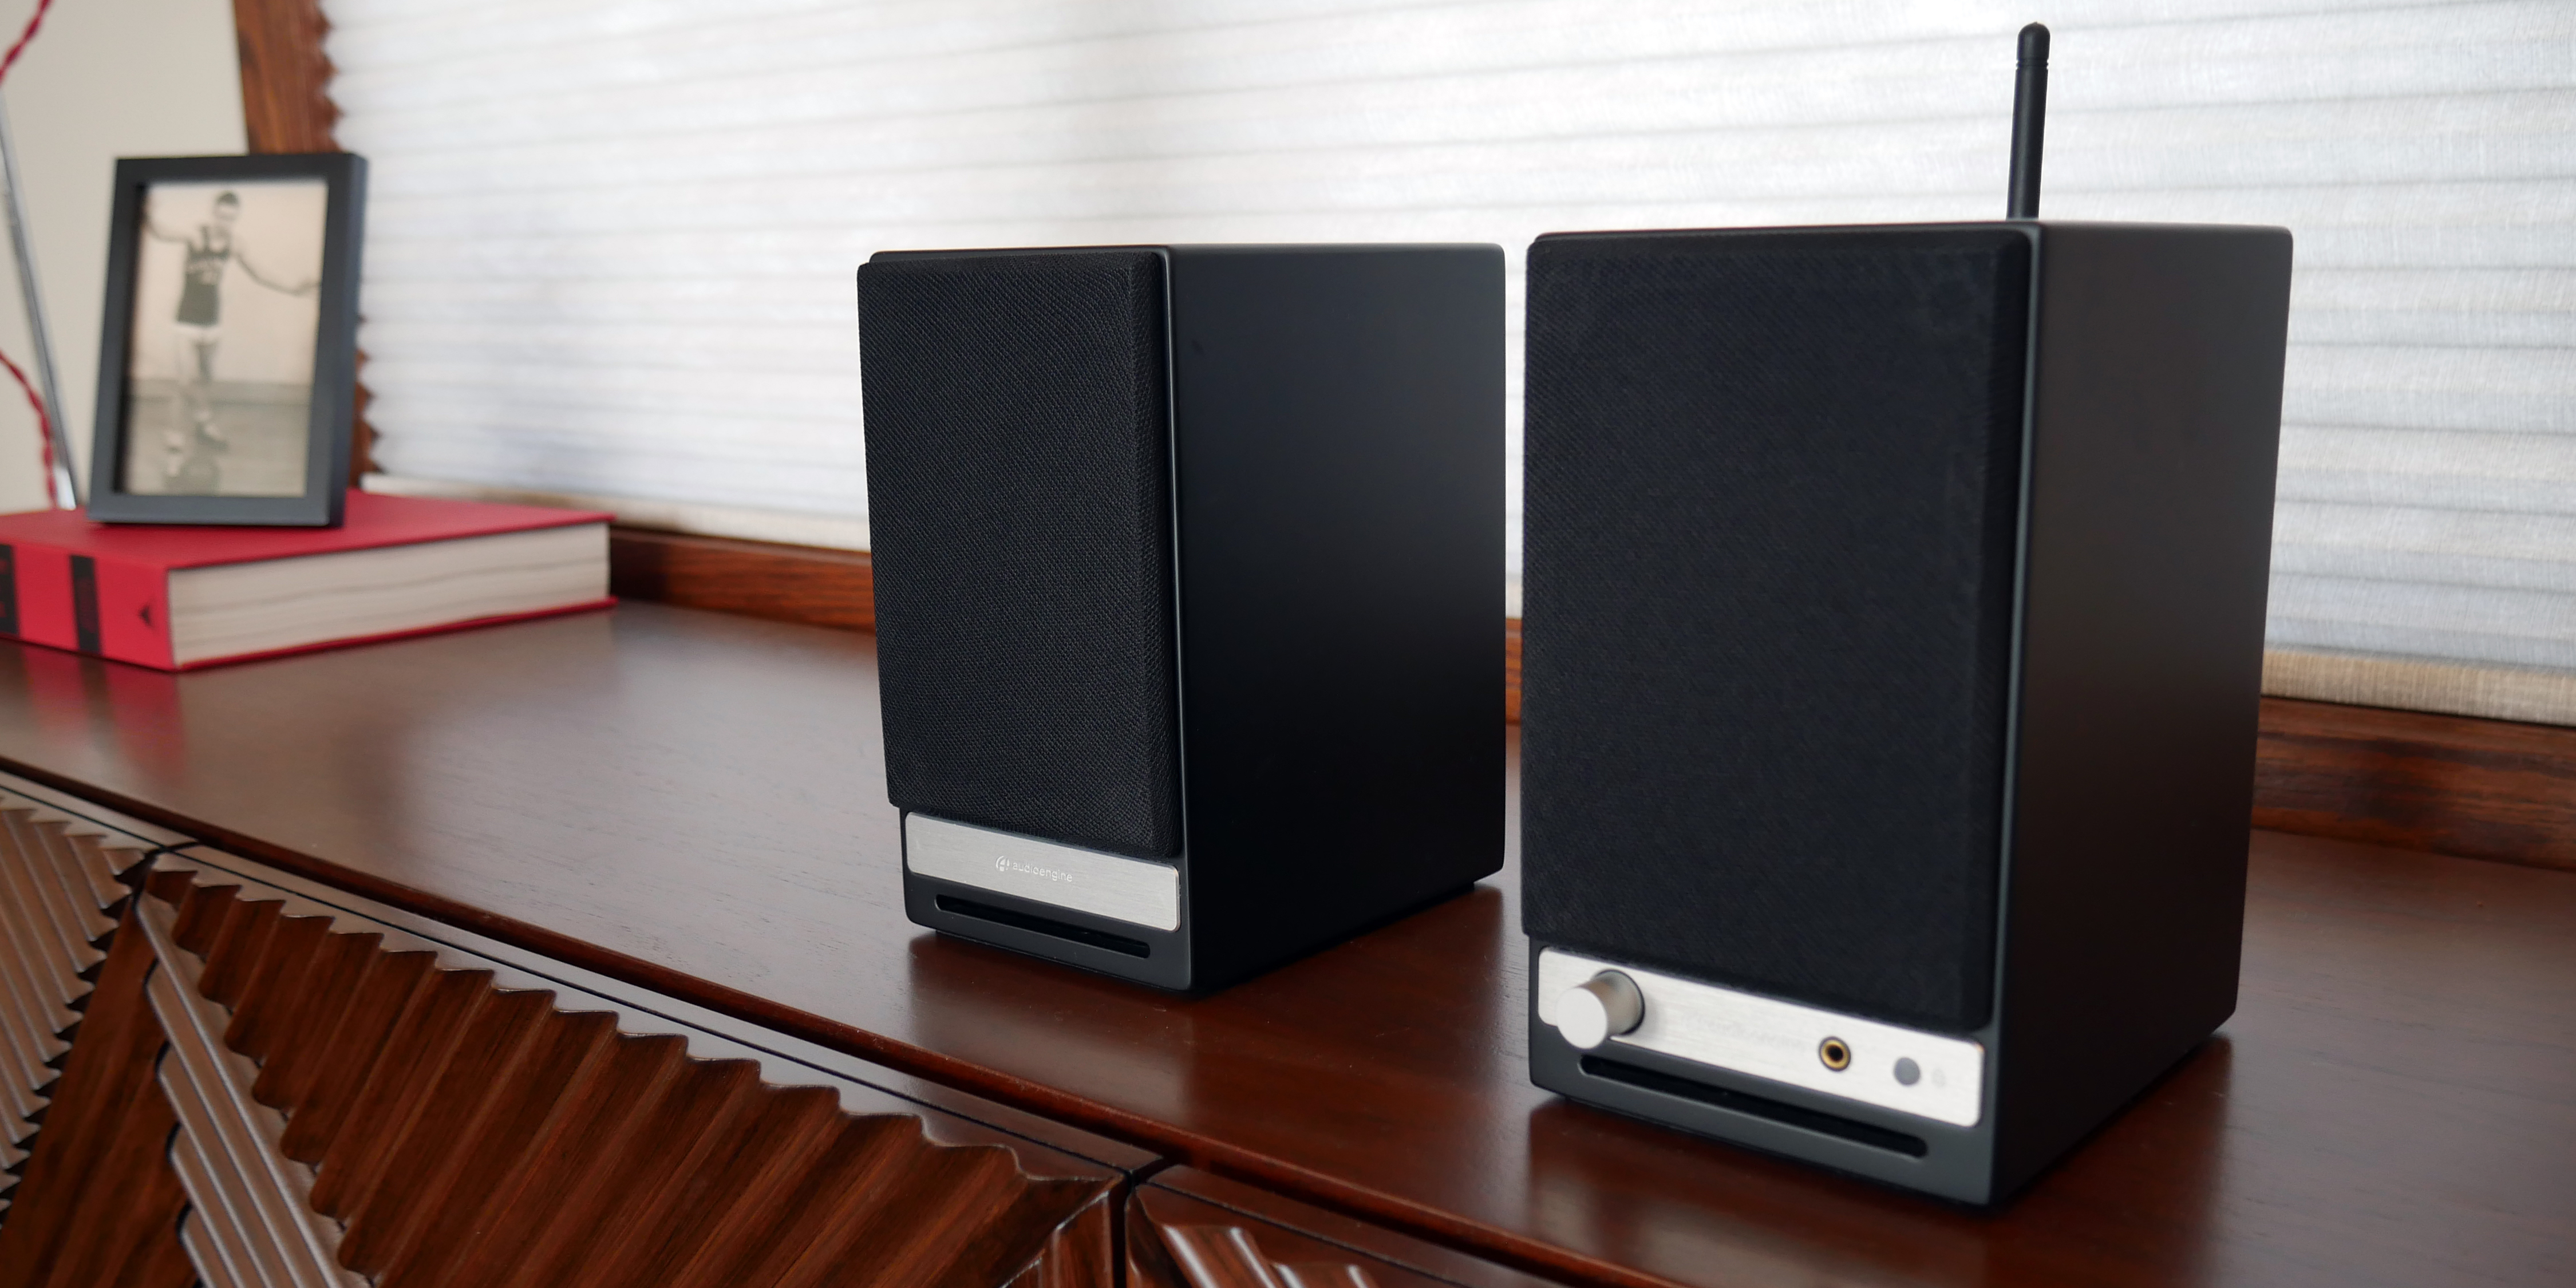 Review: Audioengine shines once again with its powerful HD3